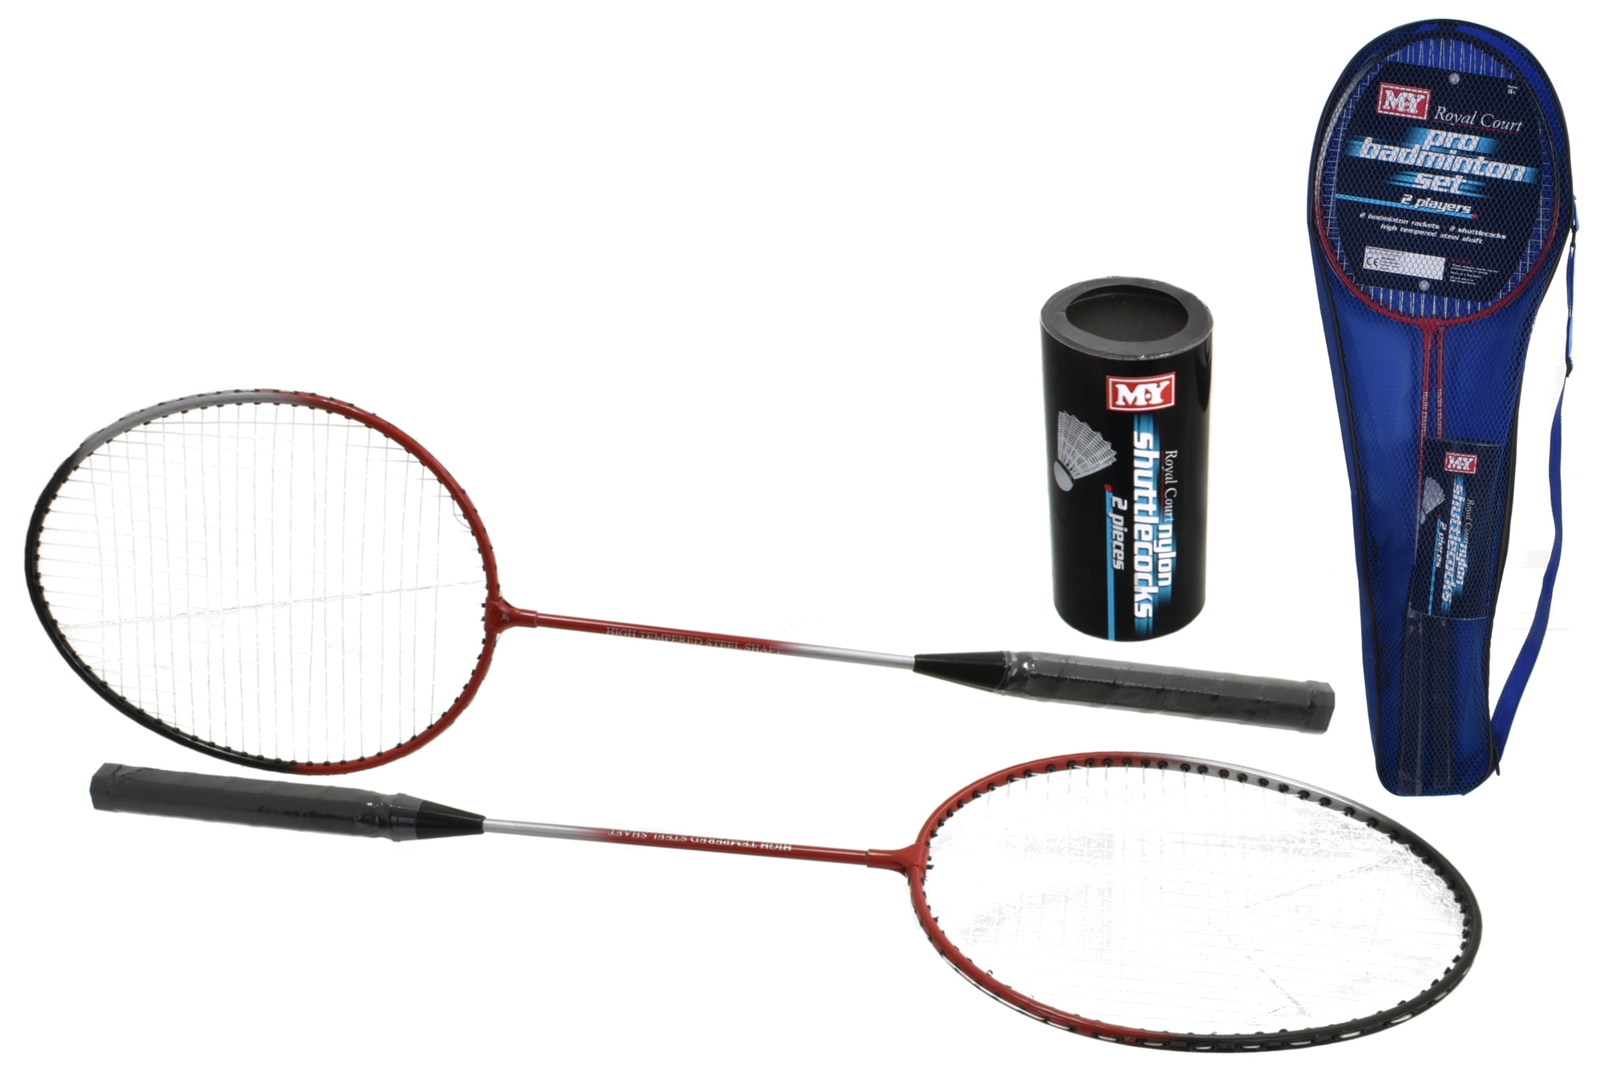 Pro Badminton Set for 2 Players Buy Kids Toys Online at ihartTOYS